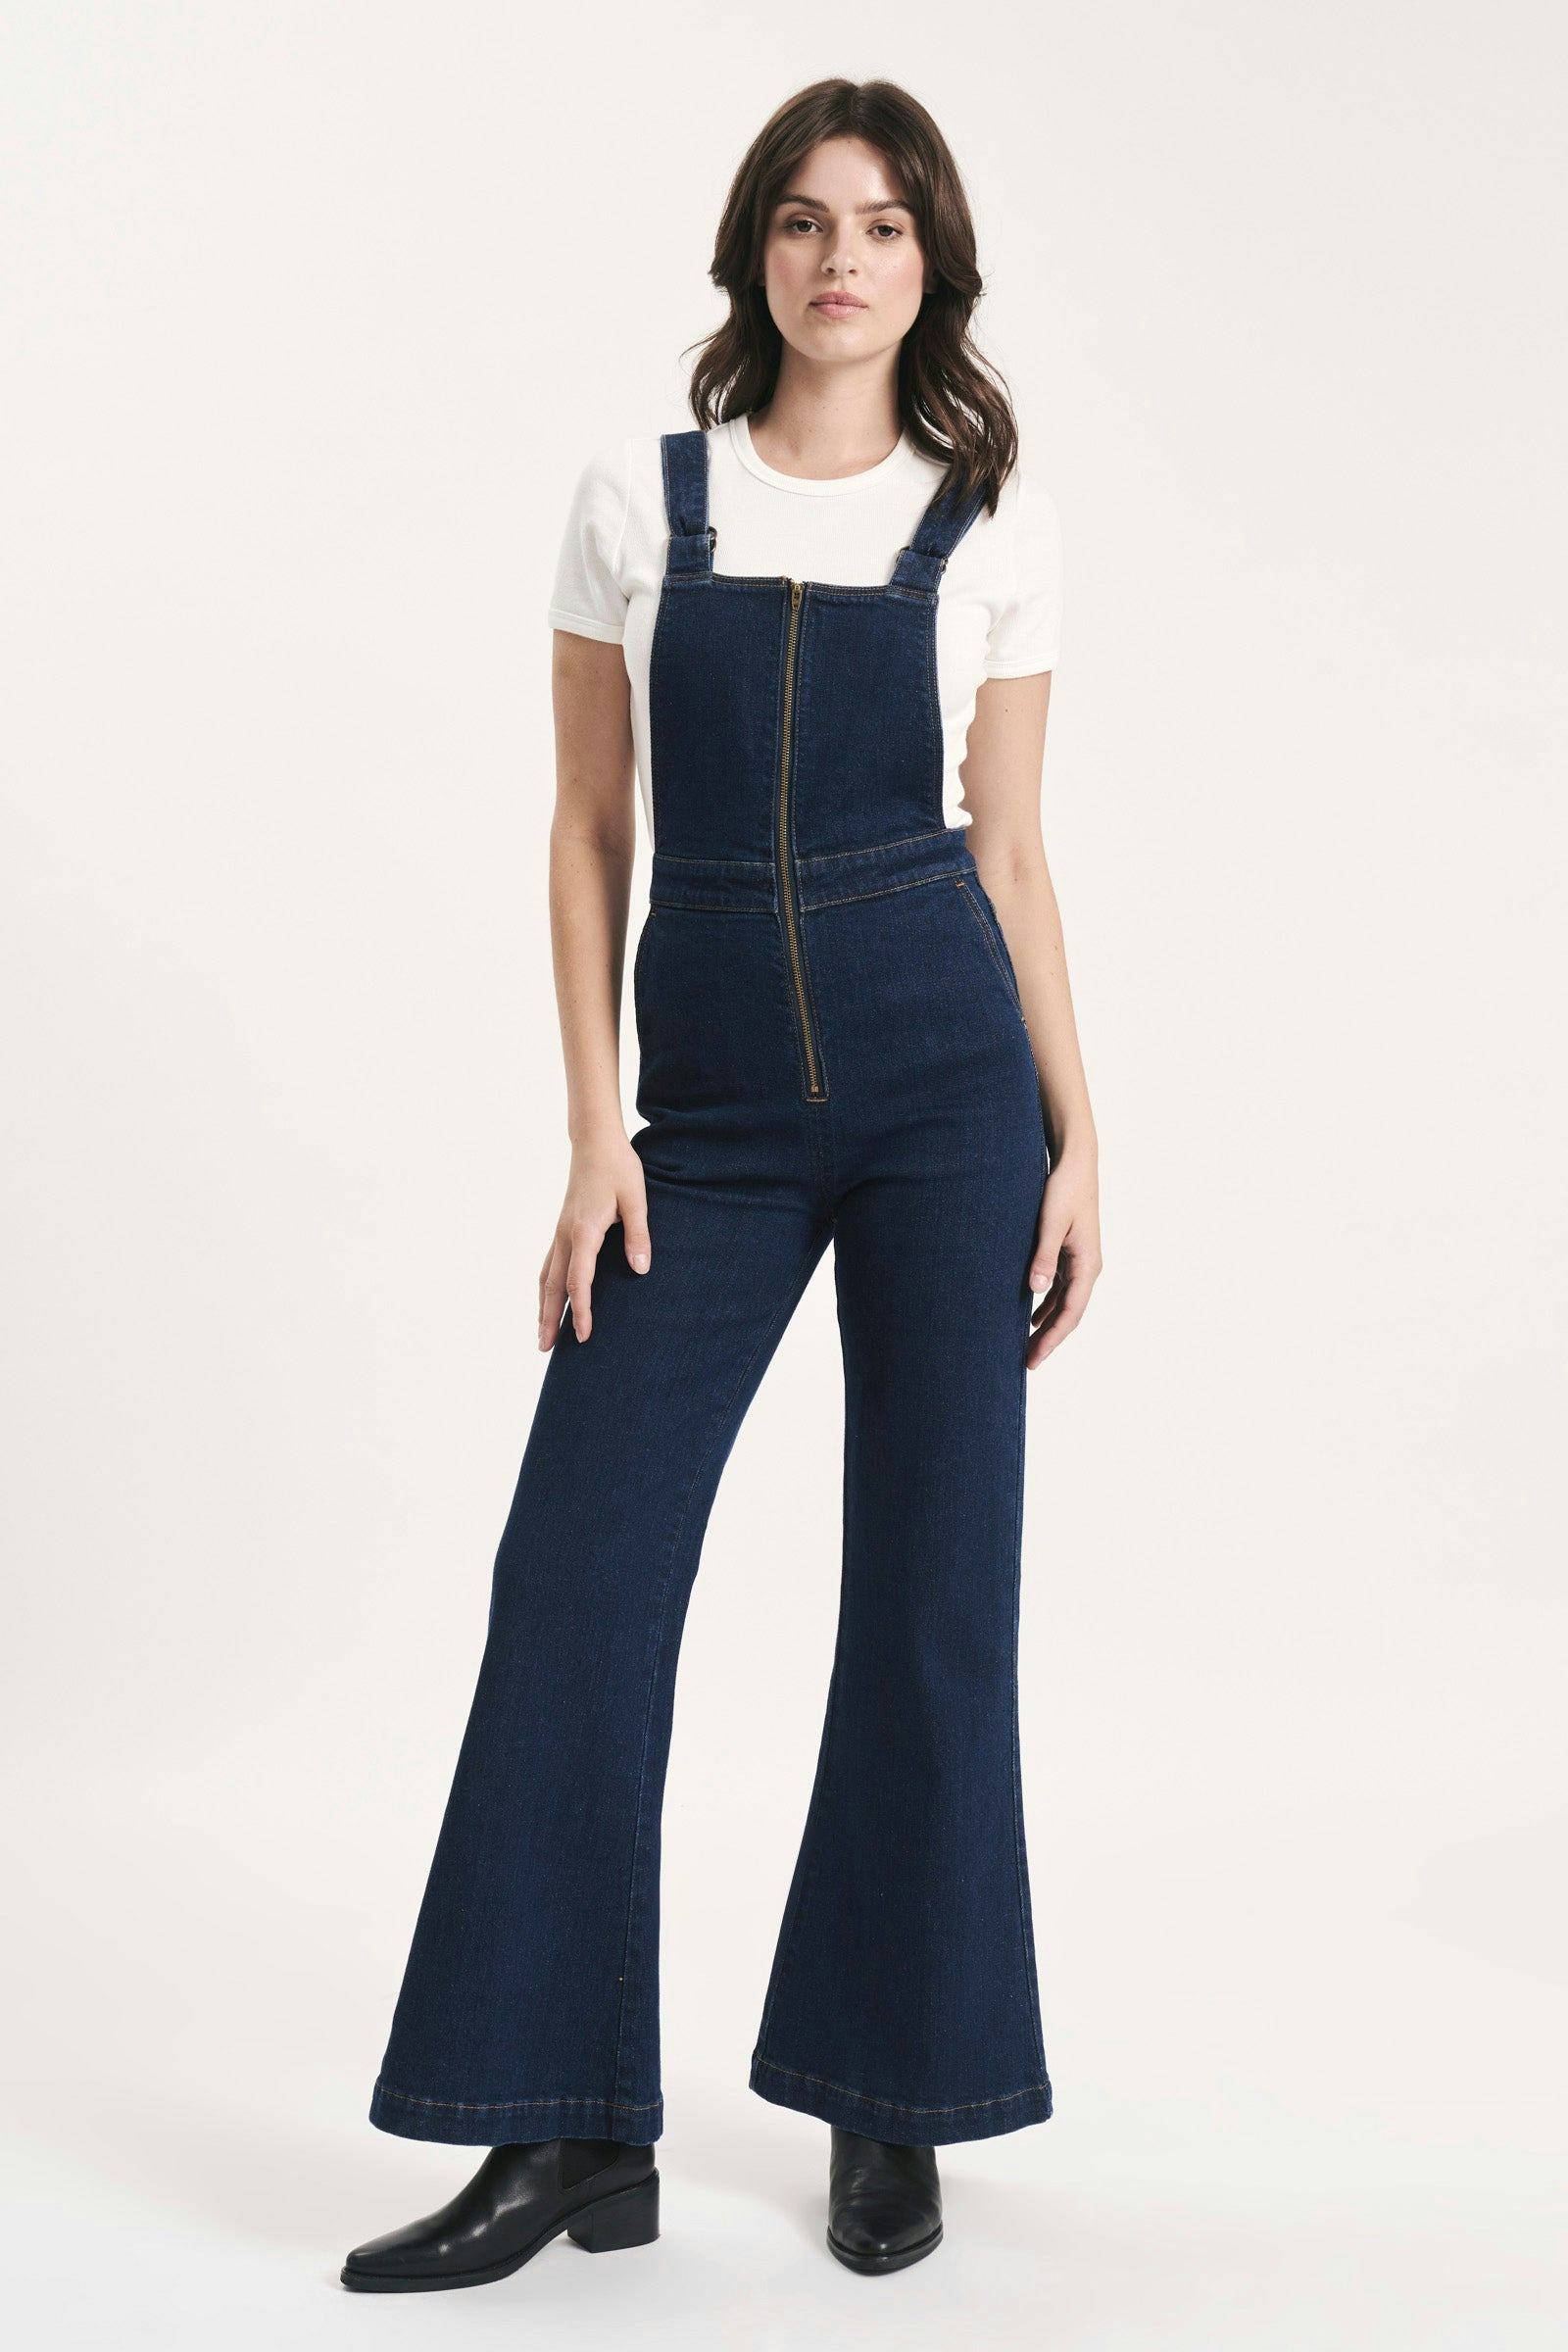 Buy Eastcoast Flare Overall - Alina Organic Online | Rollas Jeans